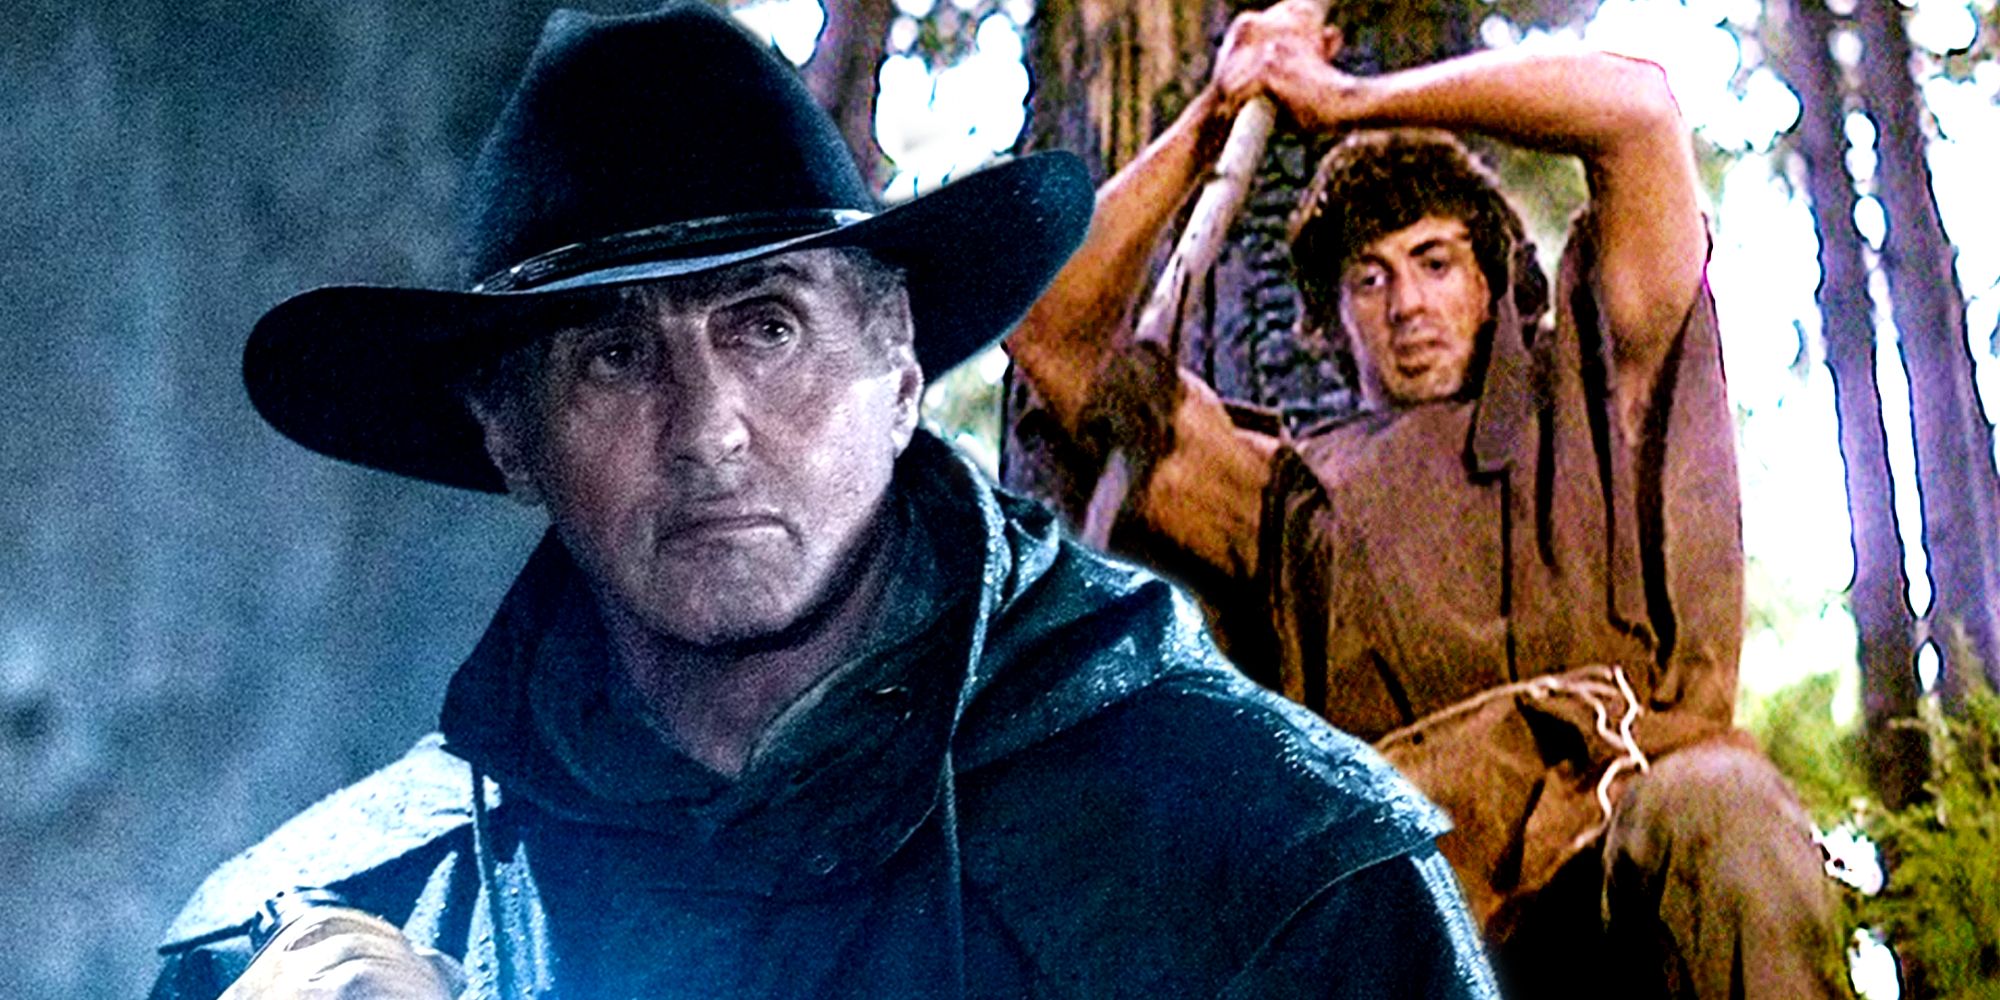 Sylvester Stallone as Rambo in First Blood and Last Blood